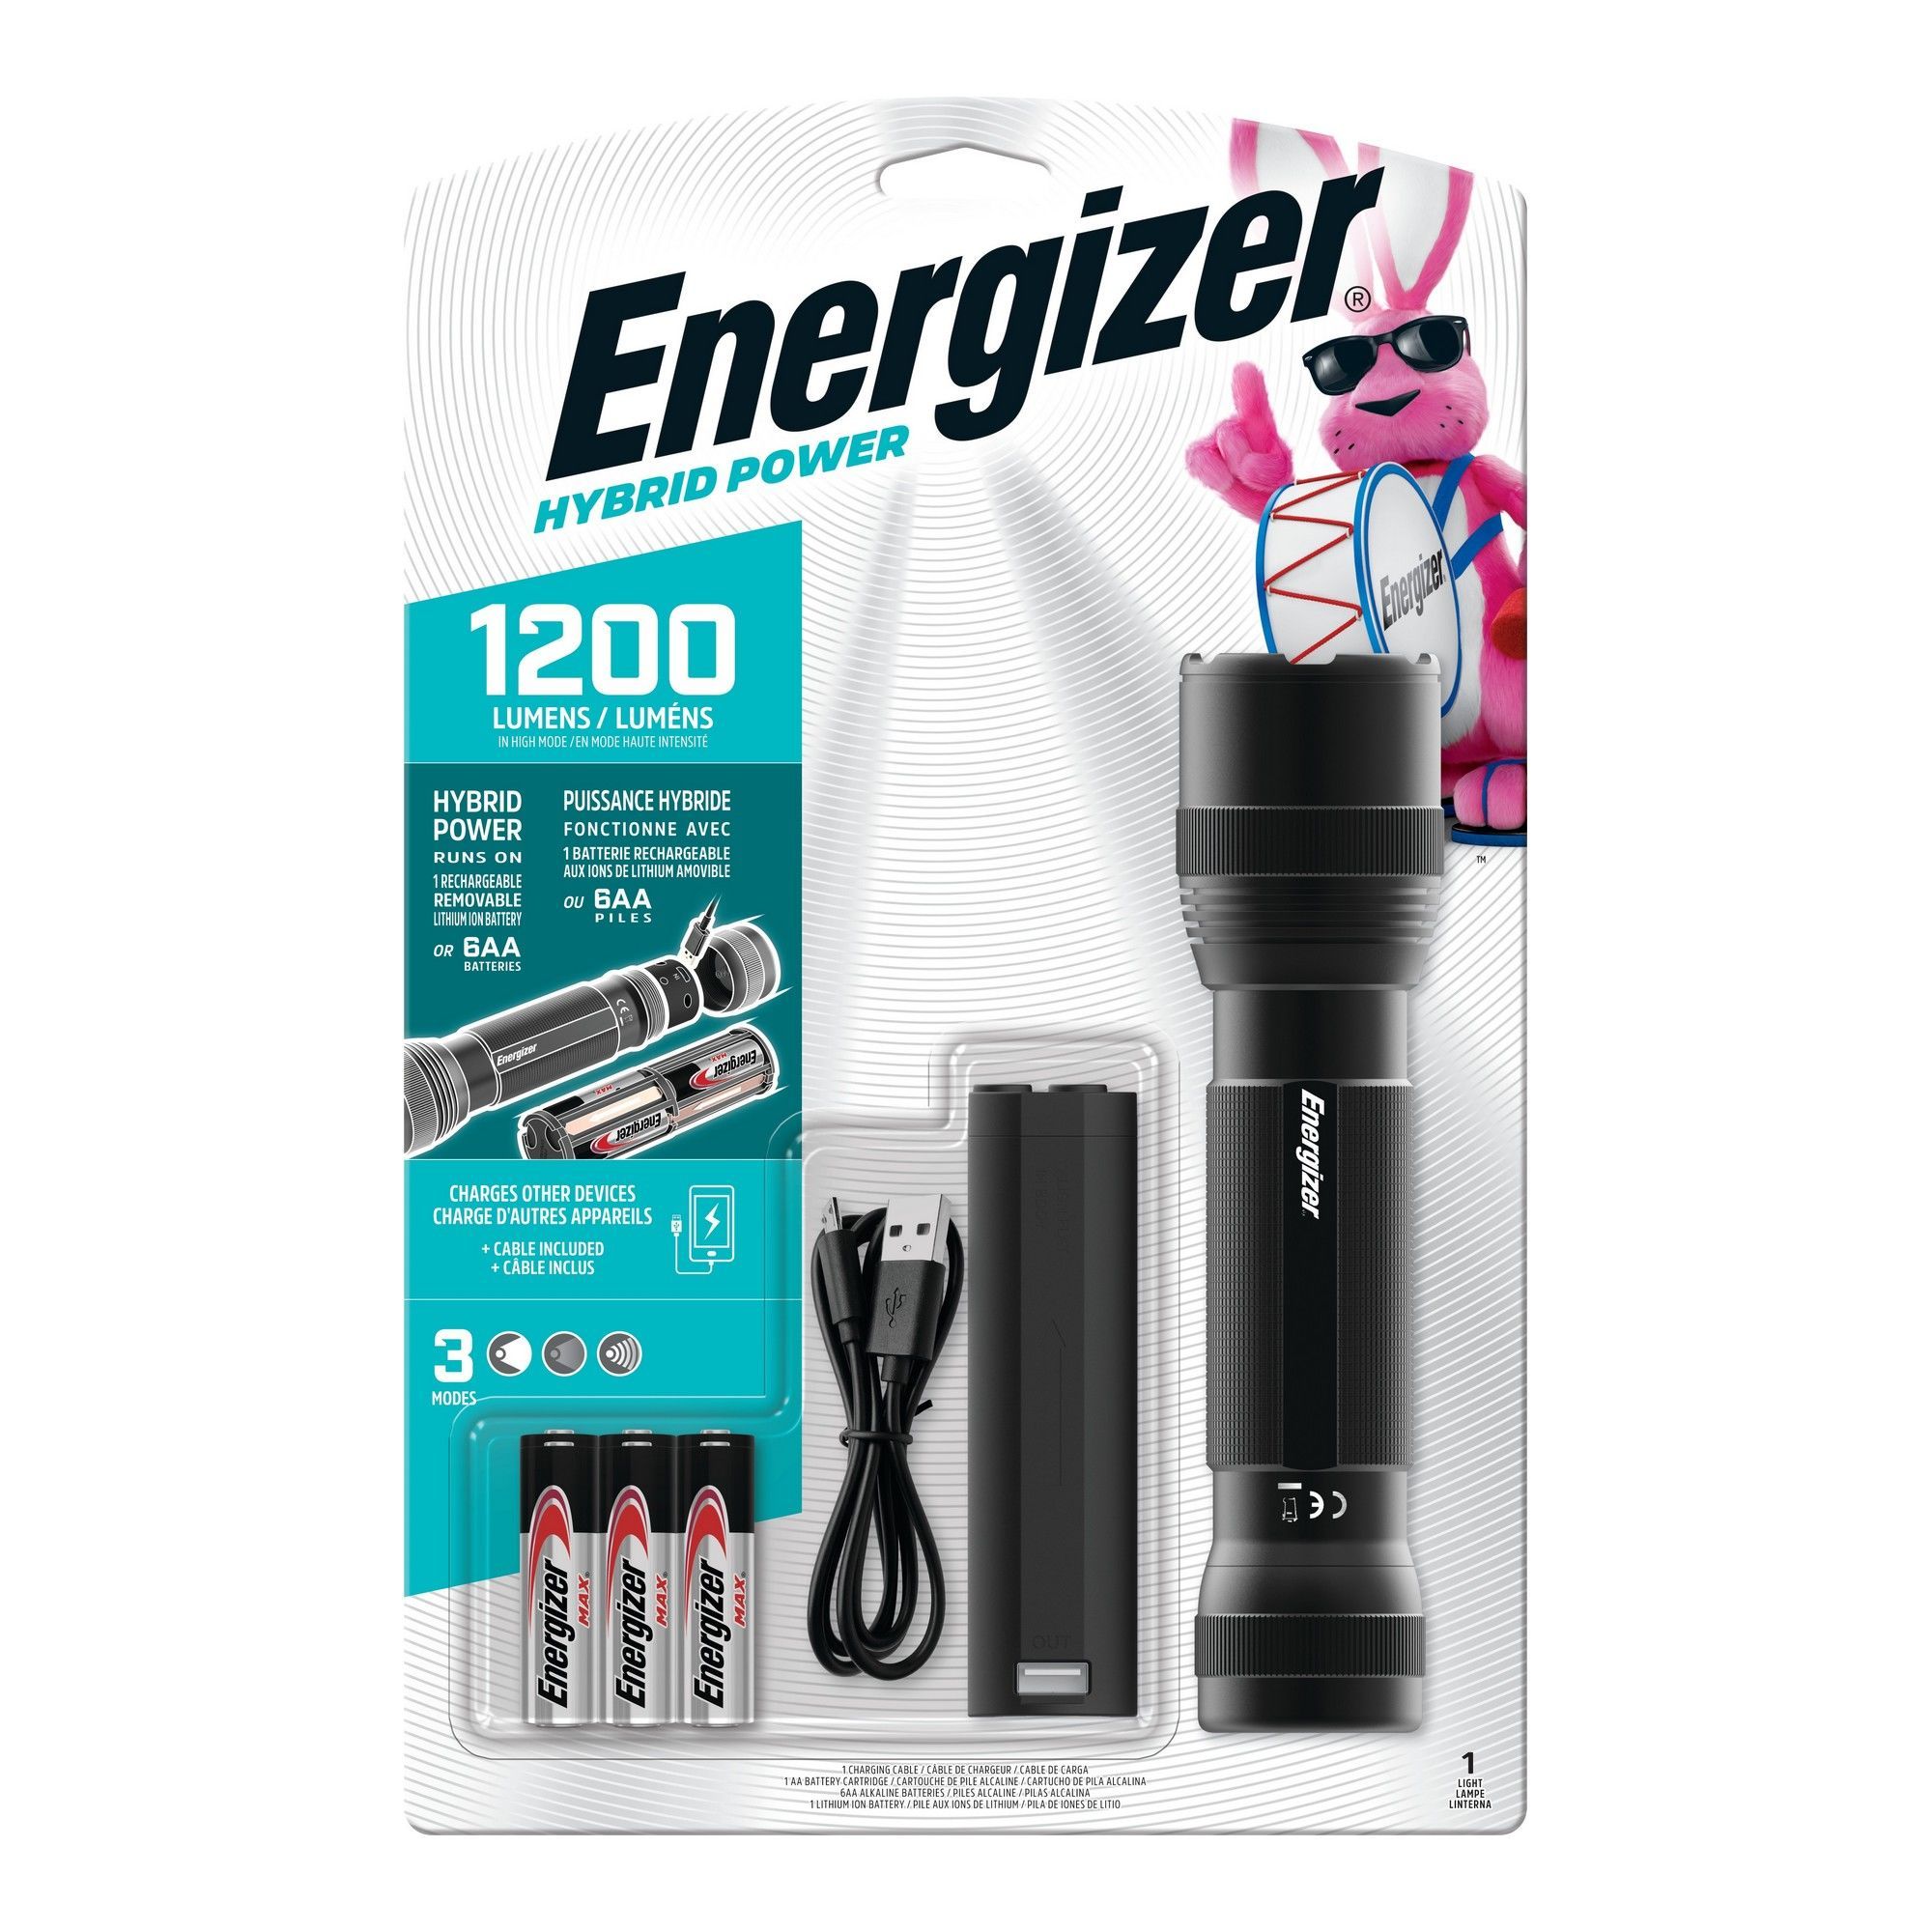 Lampe torche ENERGIZER Vision HD Focus 6AA